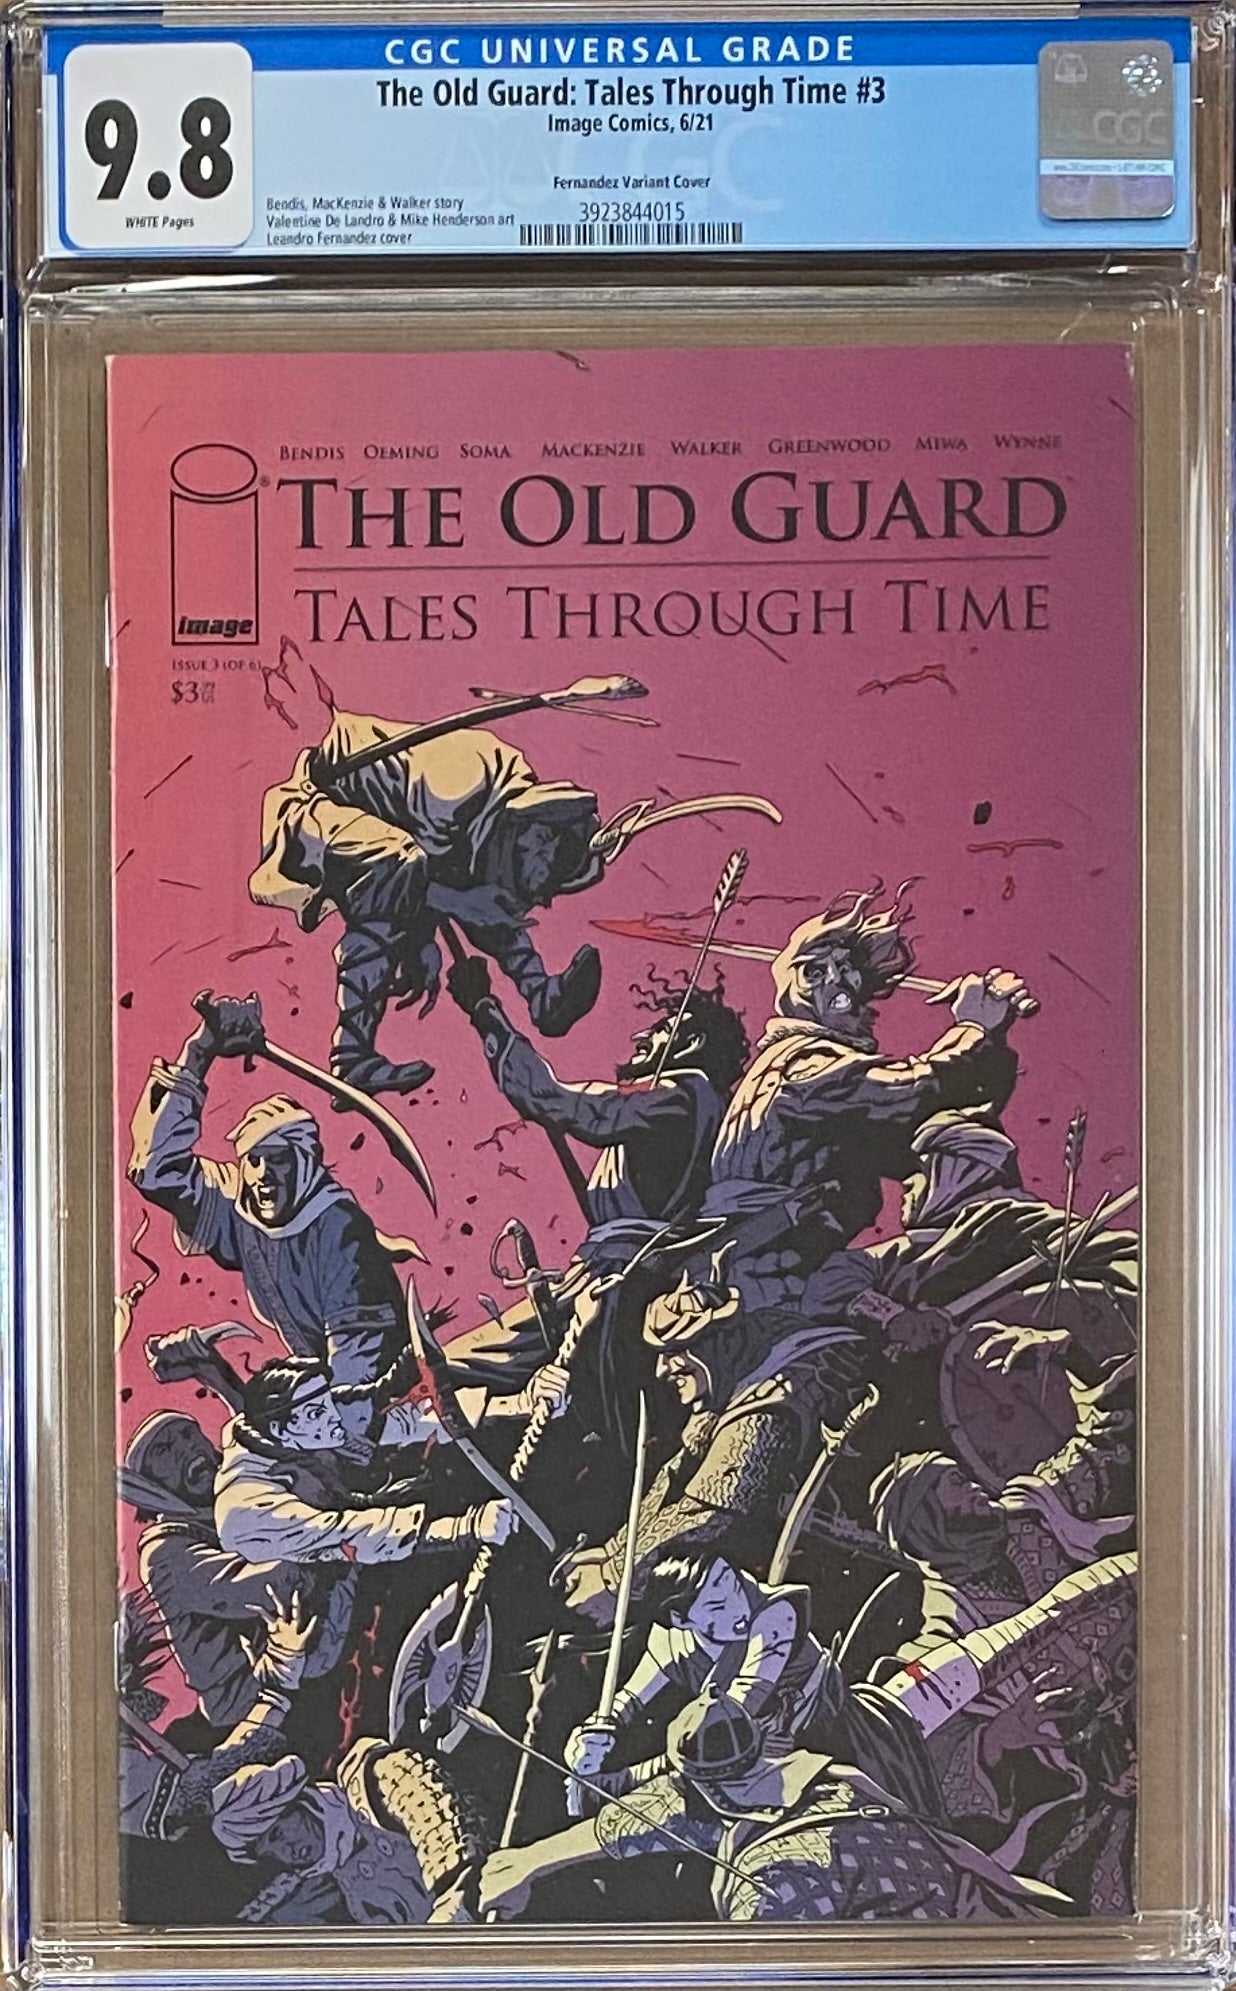 The Old Guard: Tales Through Time #3 Fernandez "Battlefield" Variant CGC 9.8